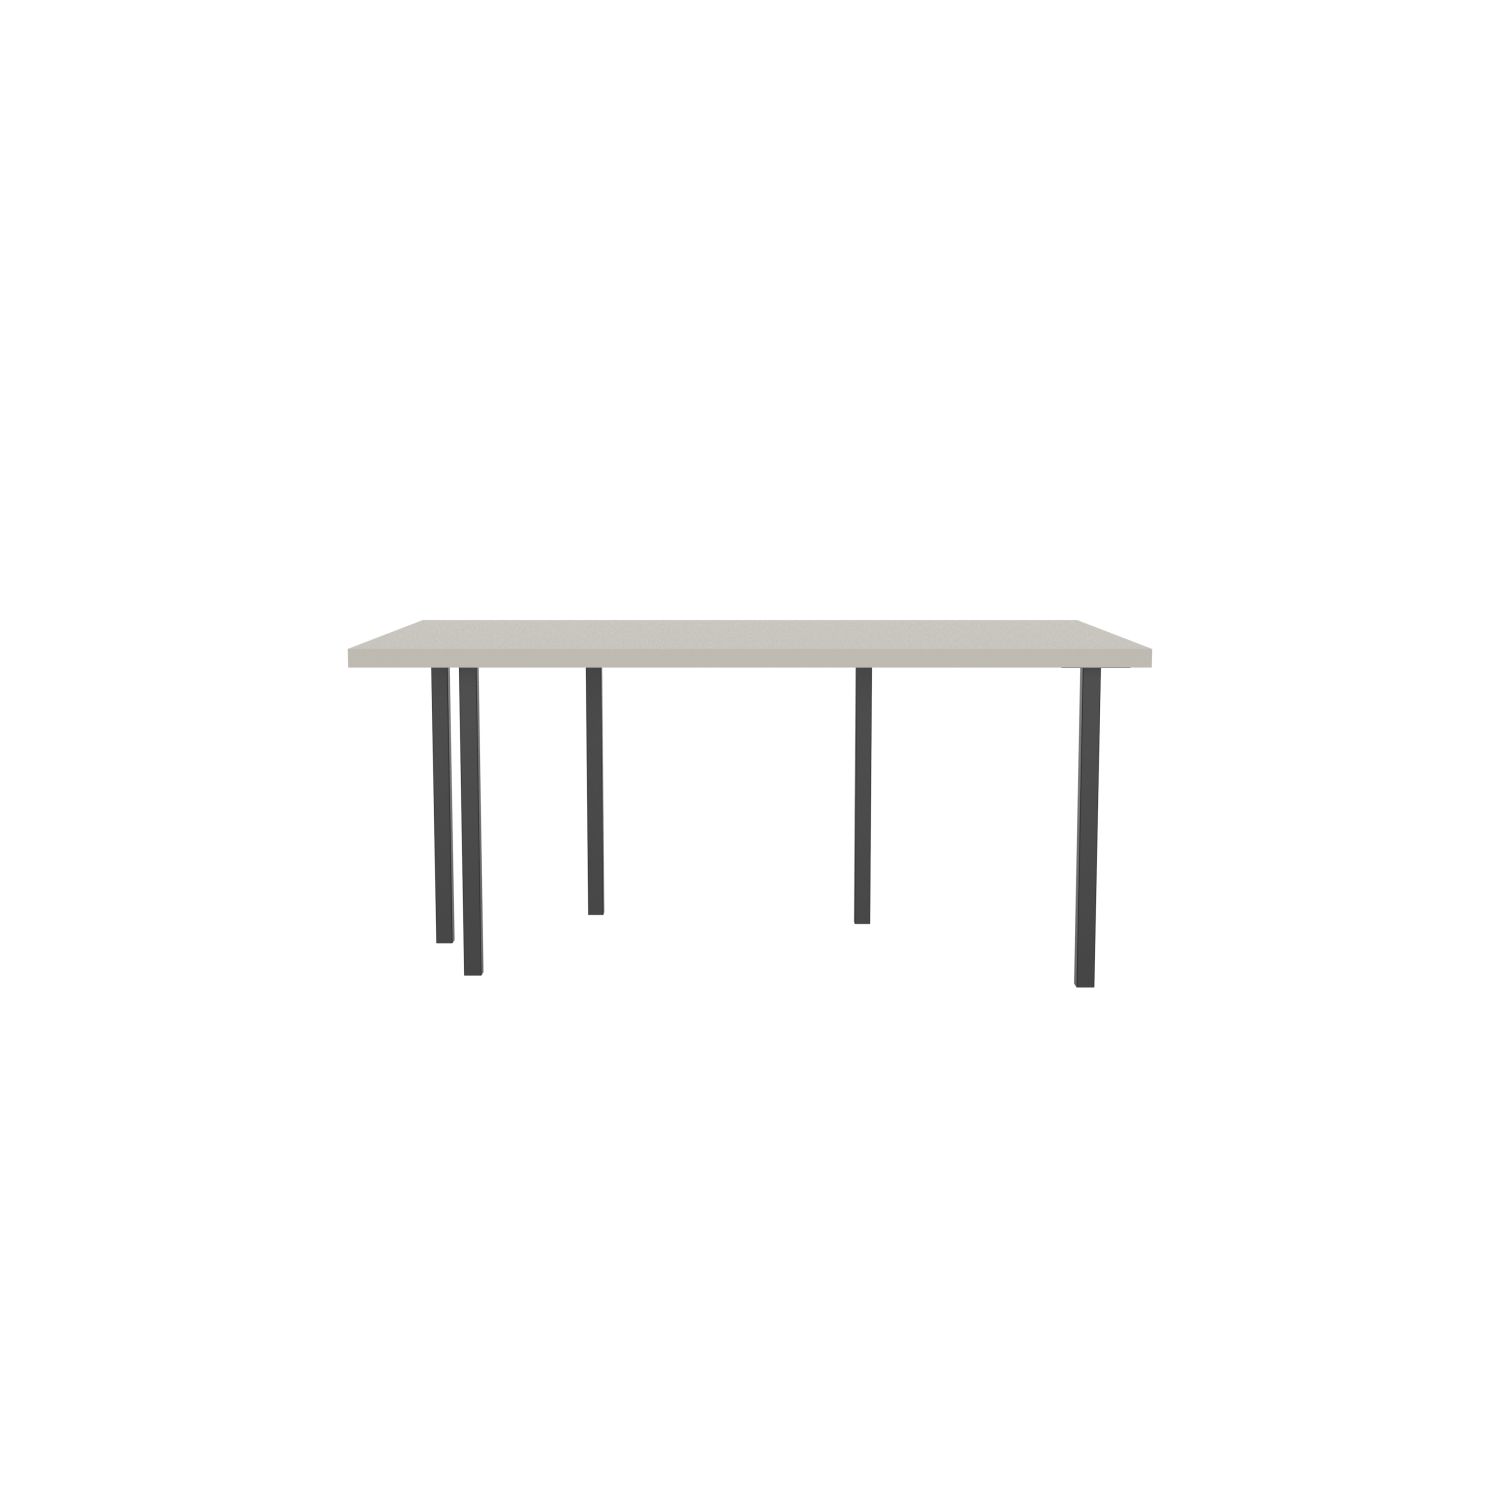 lensvelt bbrand table five fixed heigt 103x172 hpl white 50 mm price level 1 black ral9005